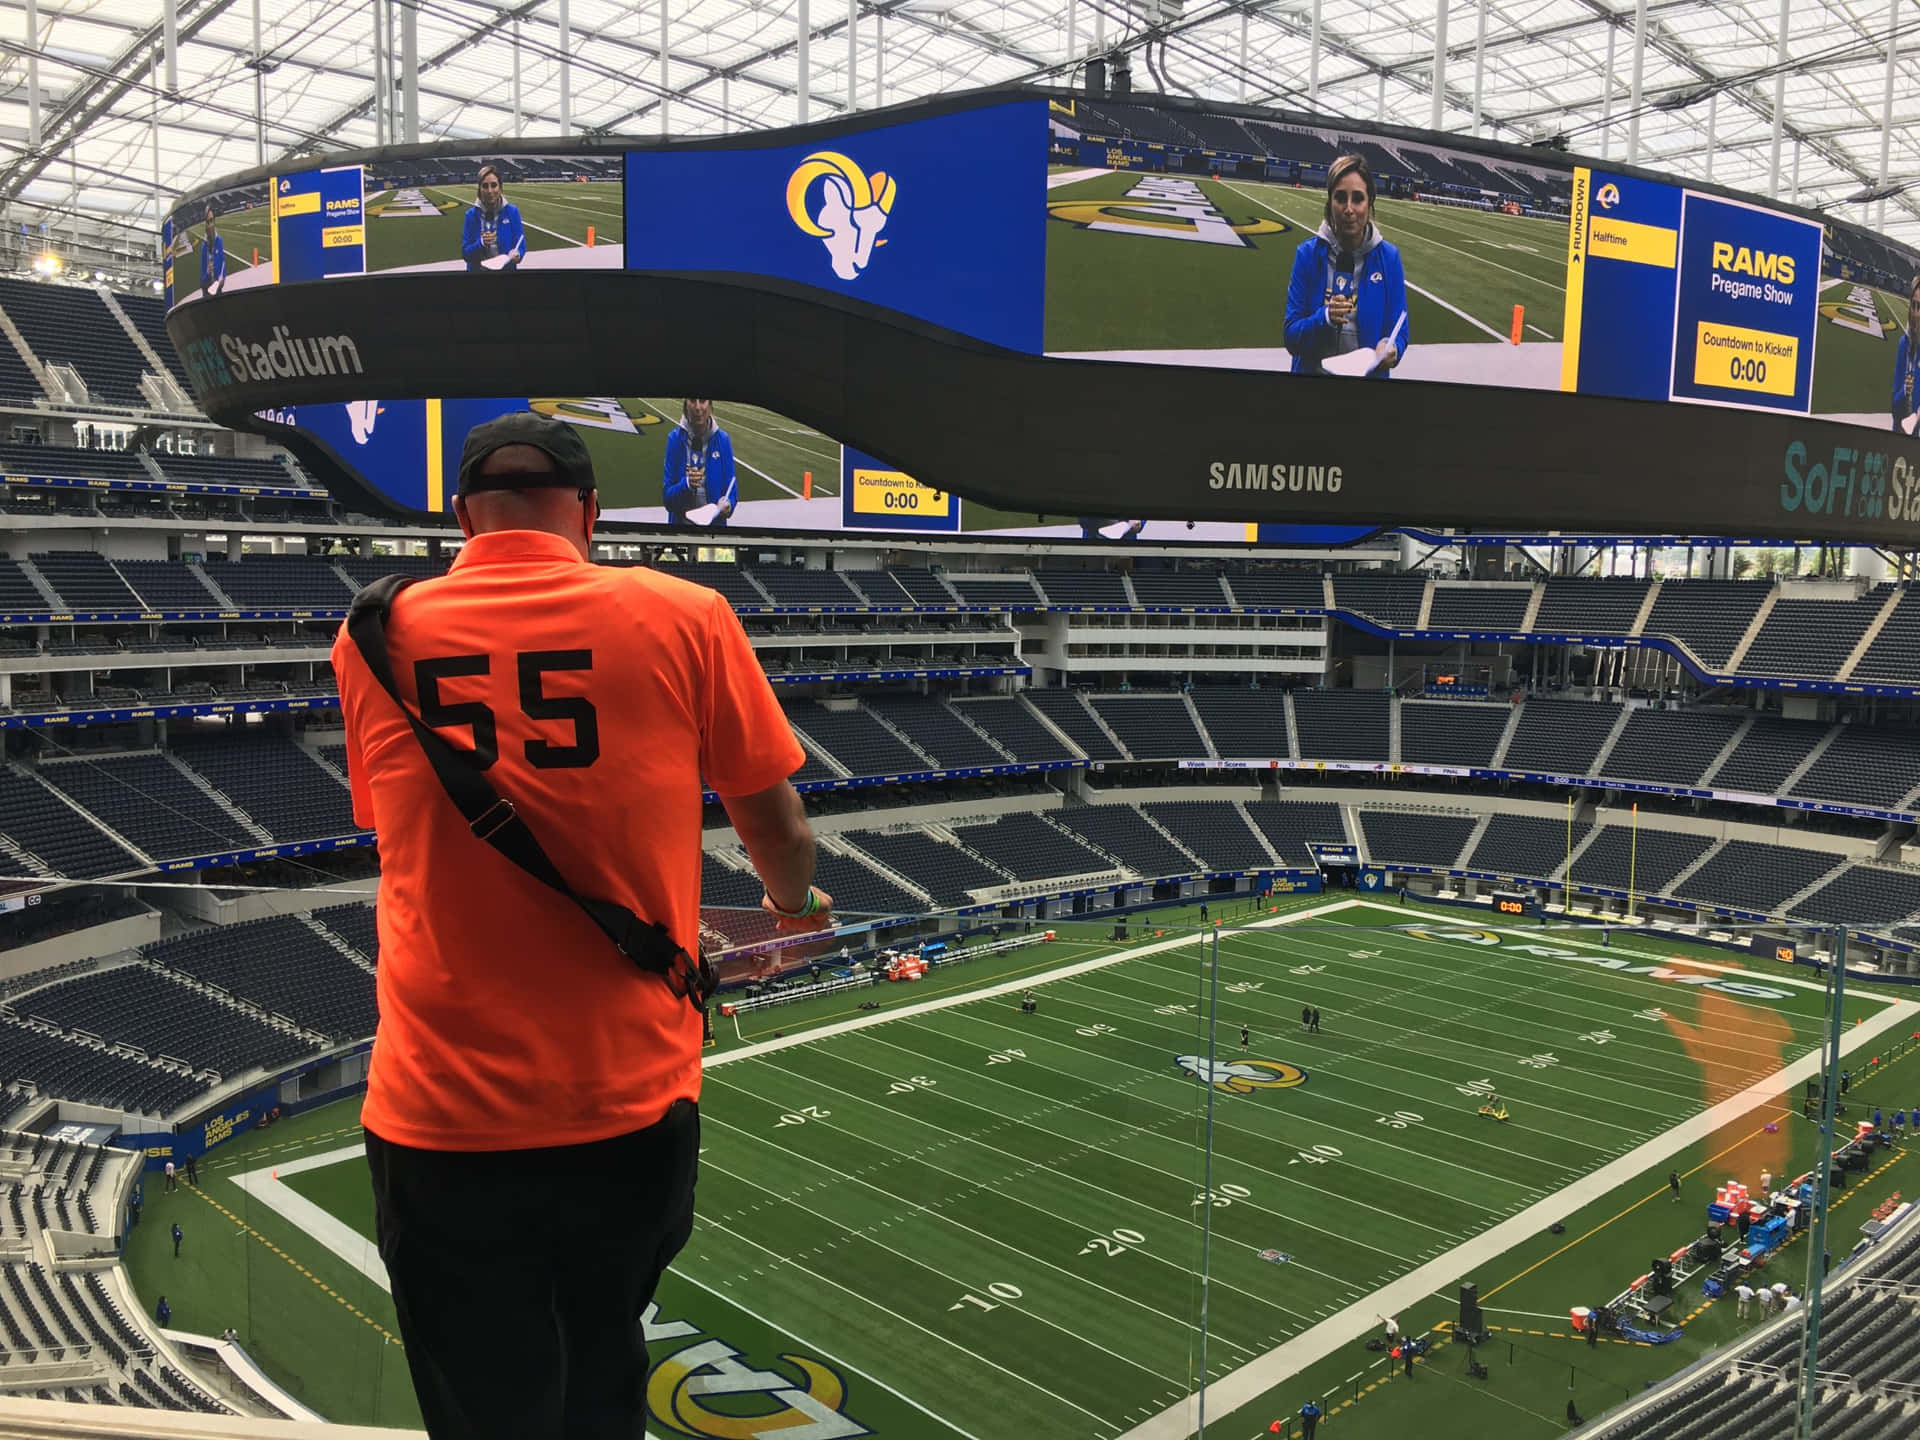 Sofi Stadium, newly constructed home of the Los Angeles Rams and Chargers.